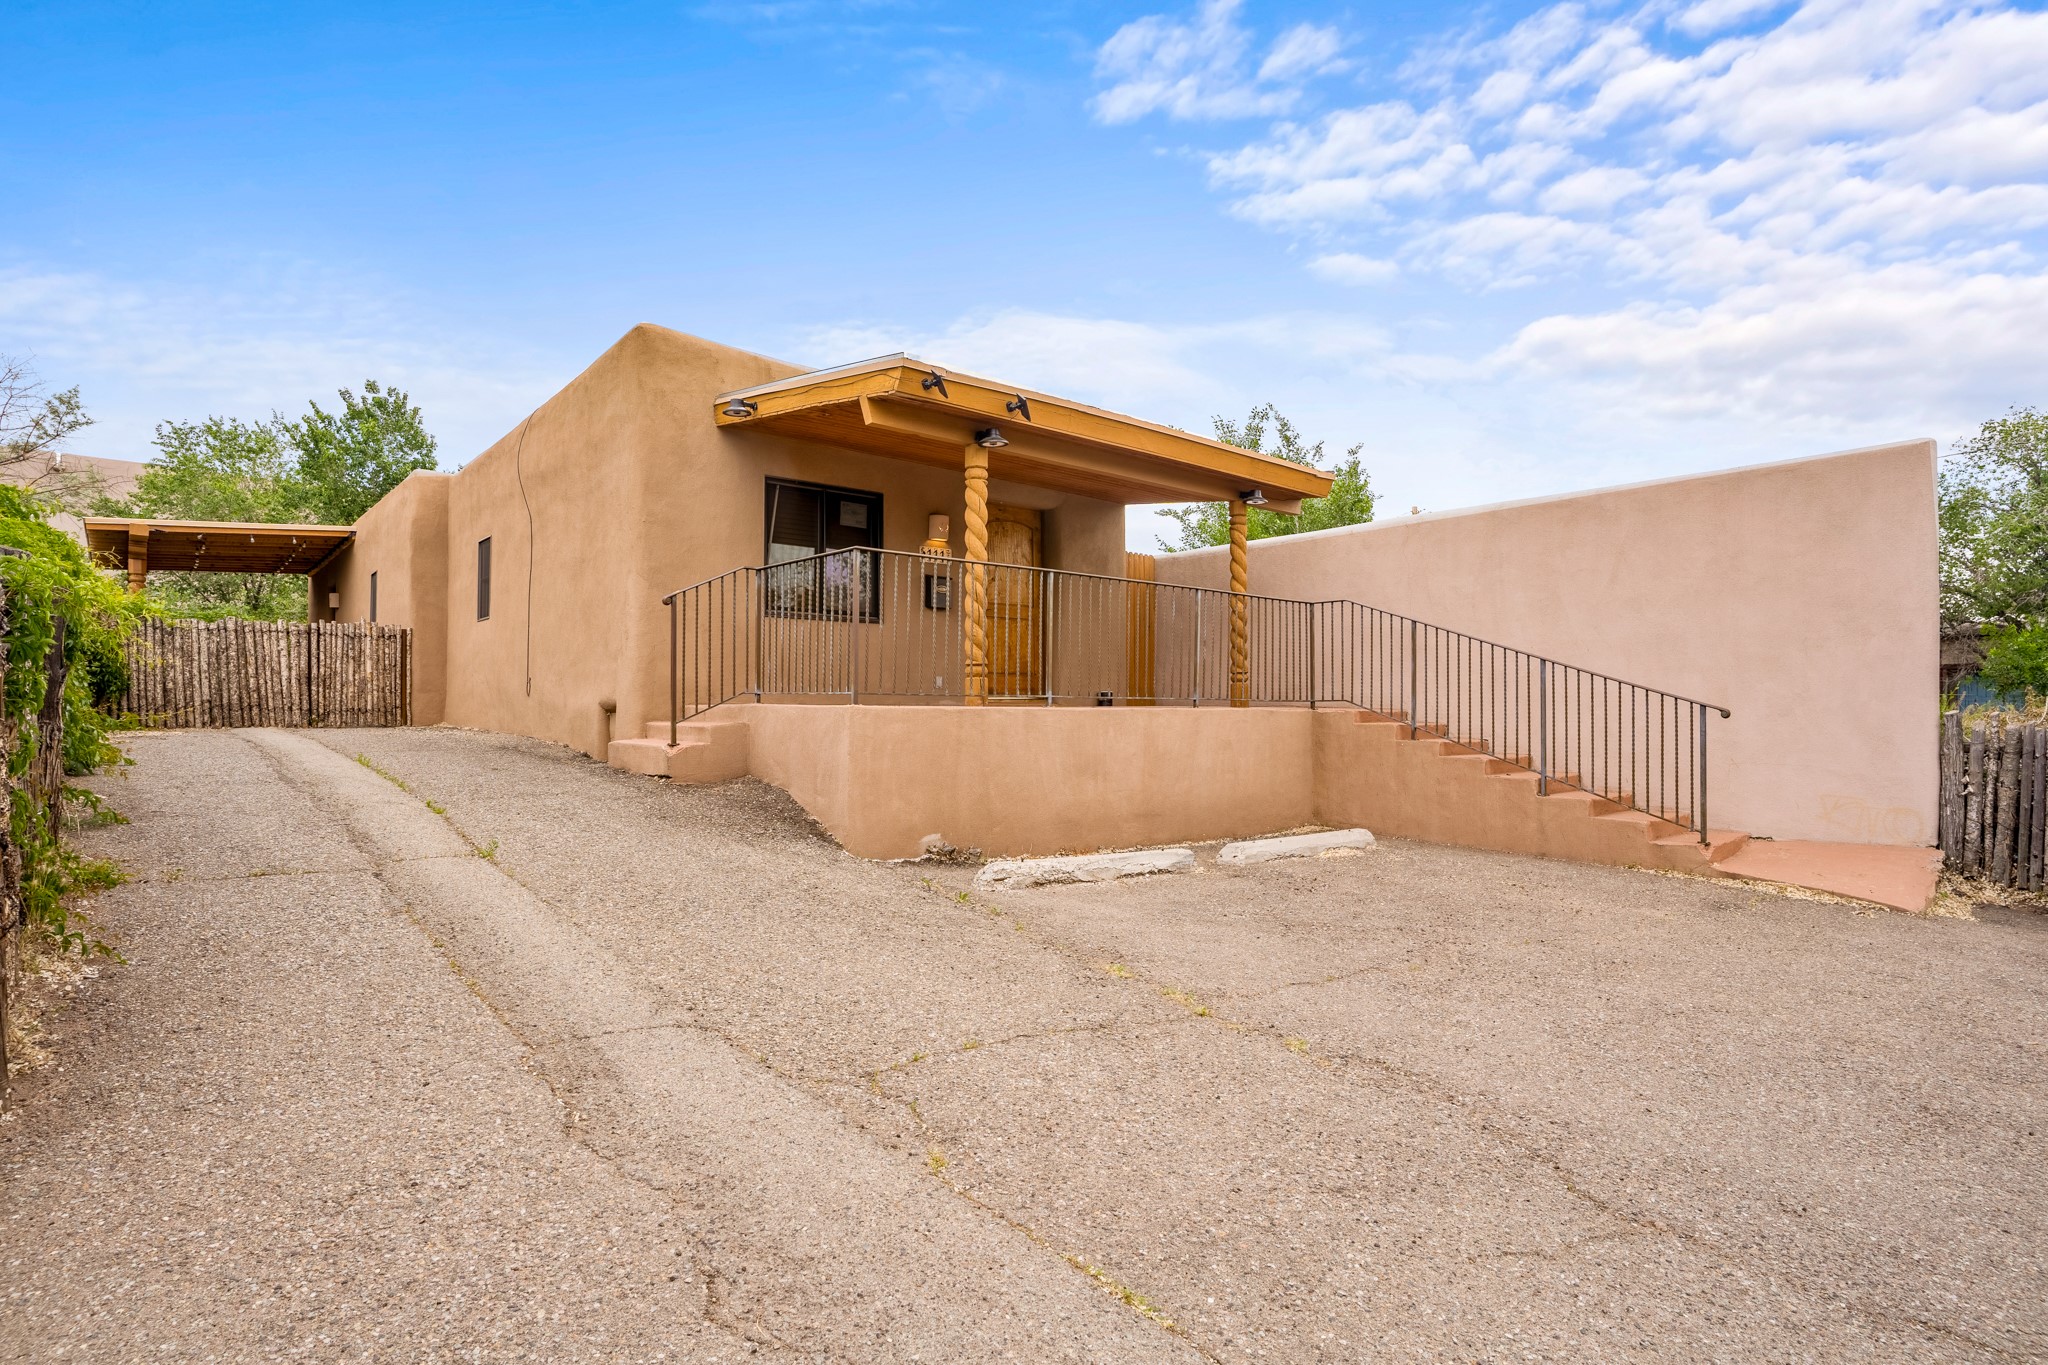 111 Saint Francis S, Santa Fe, New Mexico 87501, 1 Bedroom Bedrooms, ,1 BathroomBathrooms,Residential,For Sale,111 Saint Francis S,202338233